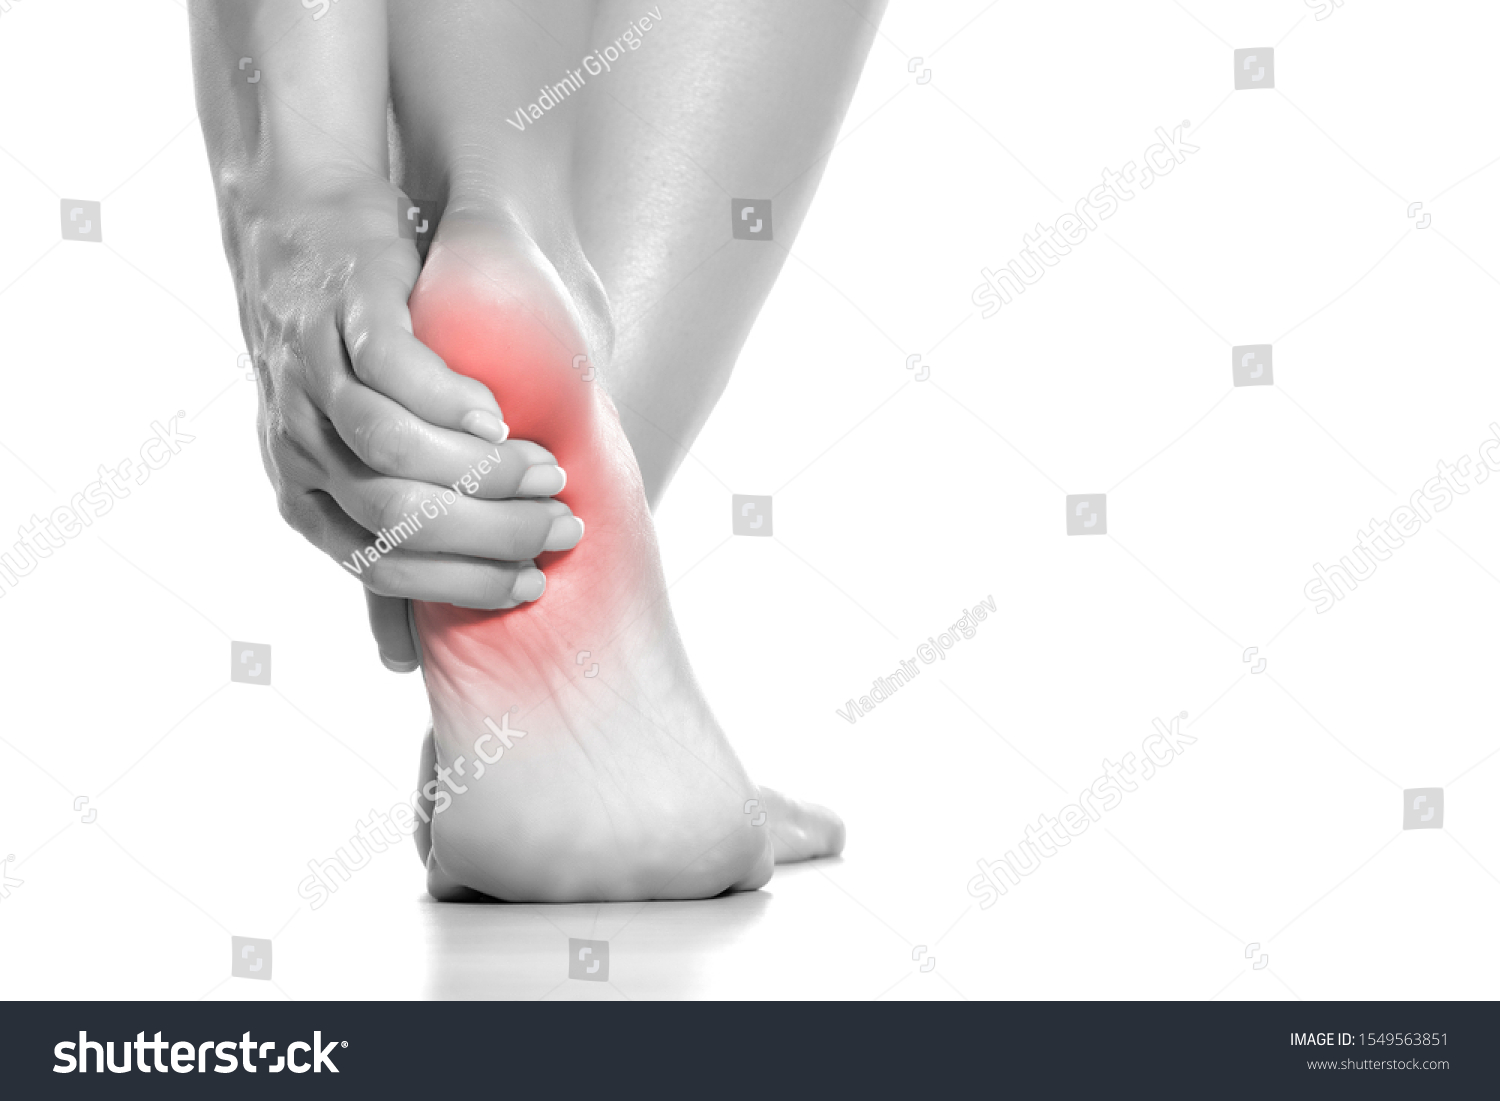 woman holding her painful heel on white background #1549563851